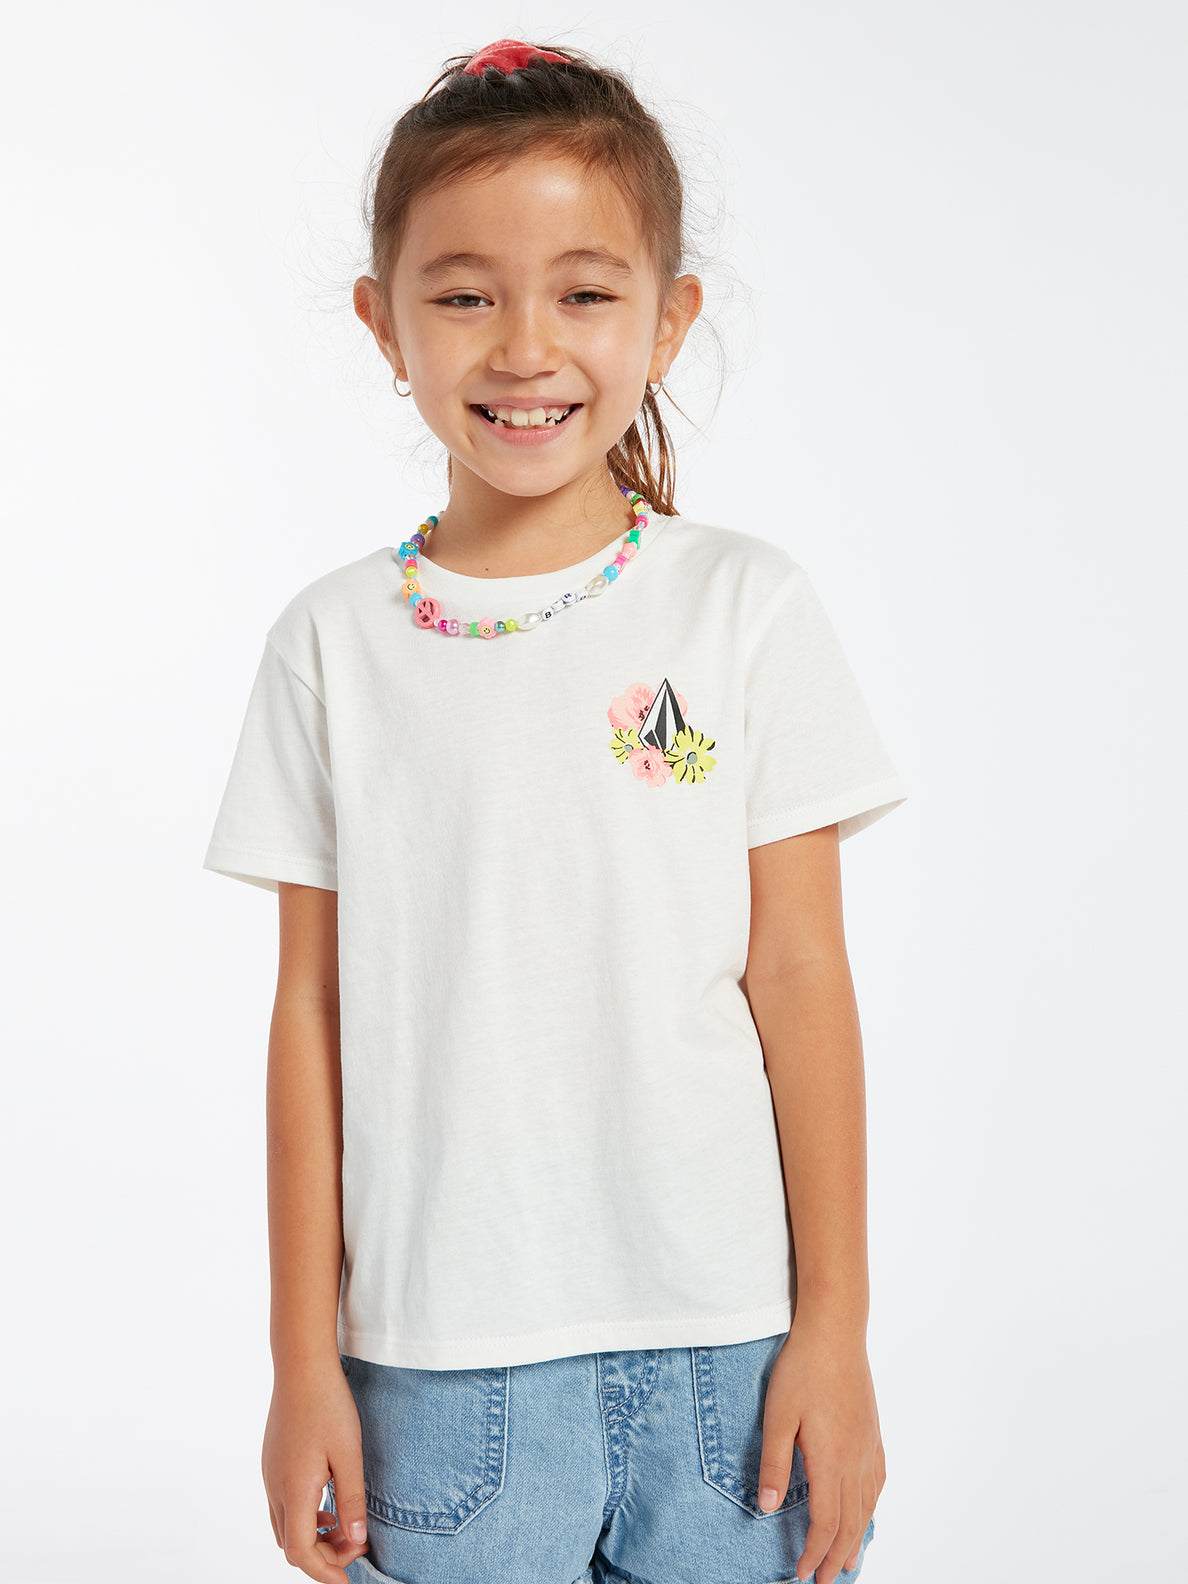 Big Girls Last Party Tee - Star White (R3522200_SWH) [1]